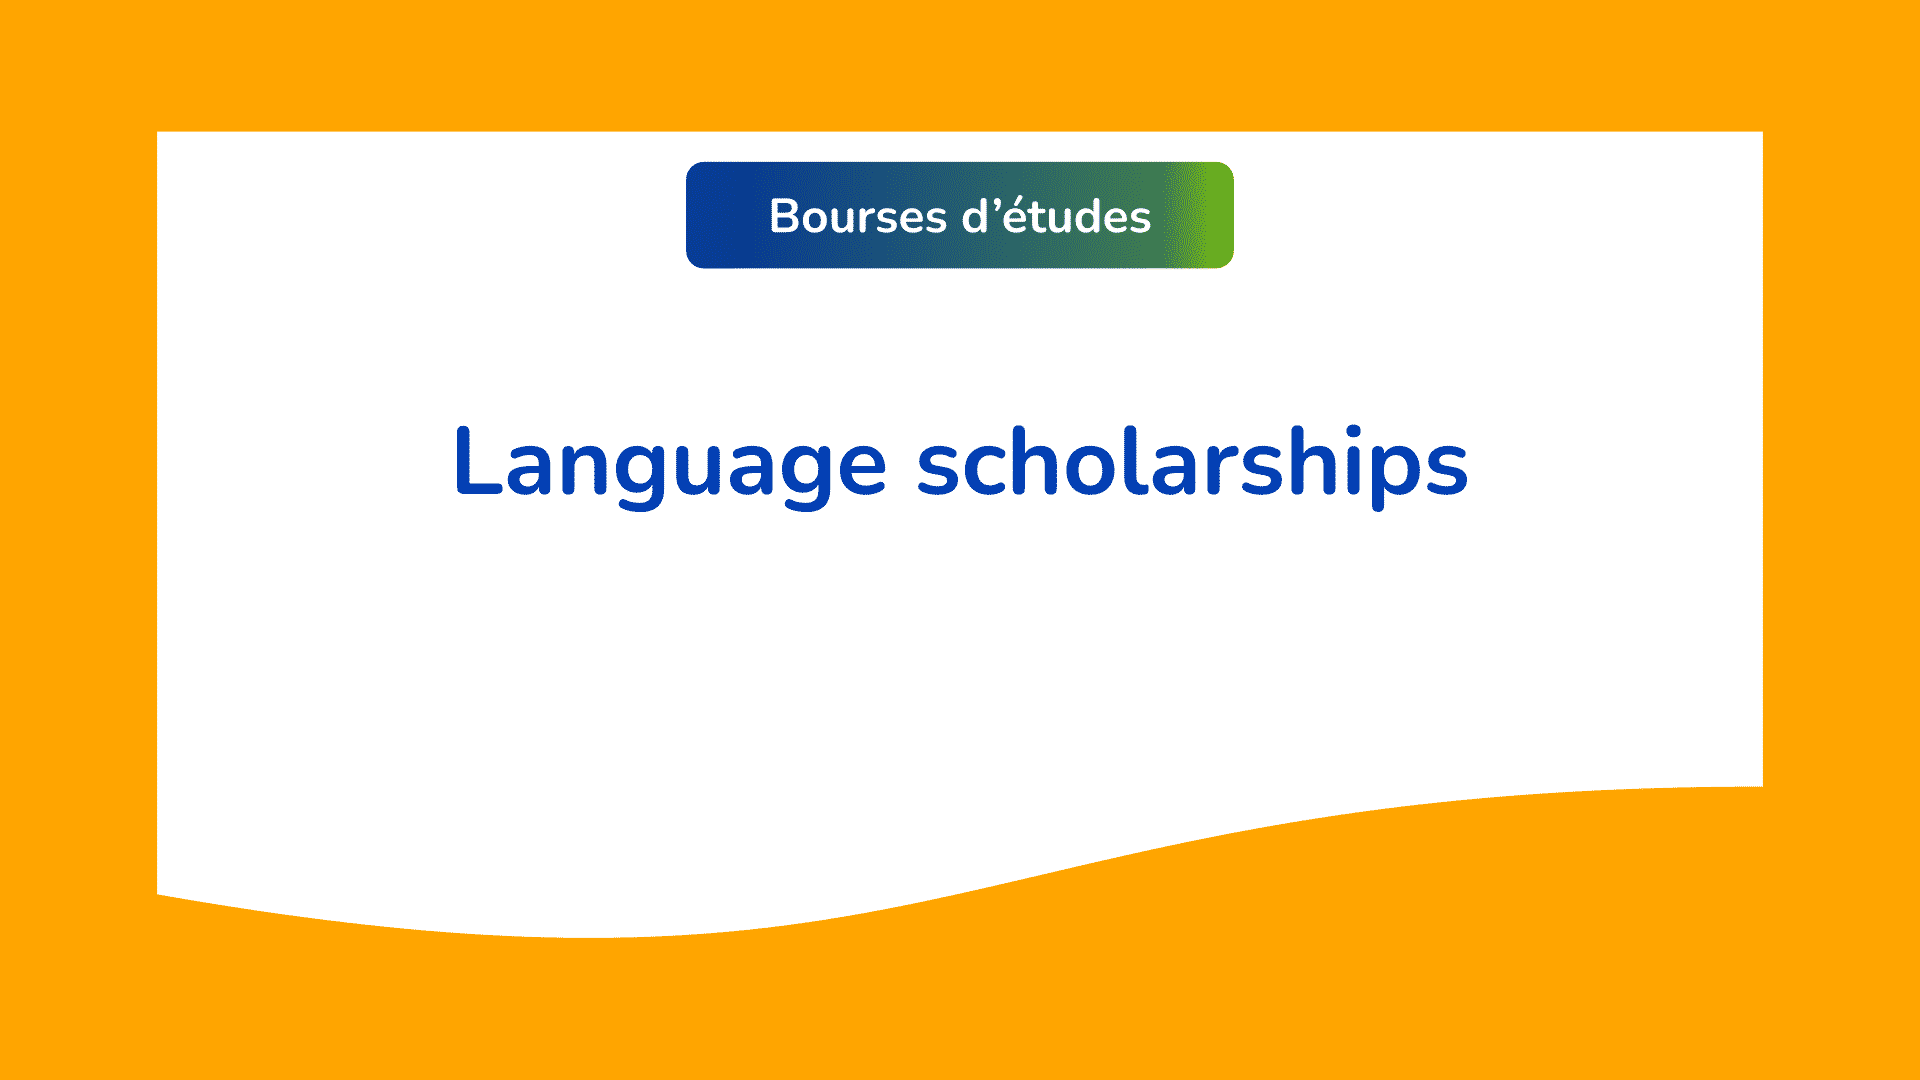 16 modern language scholarships available in 2023-2024